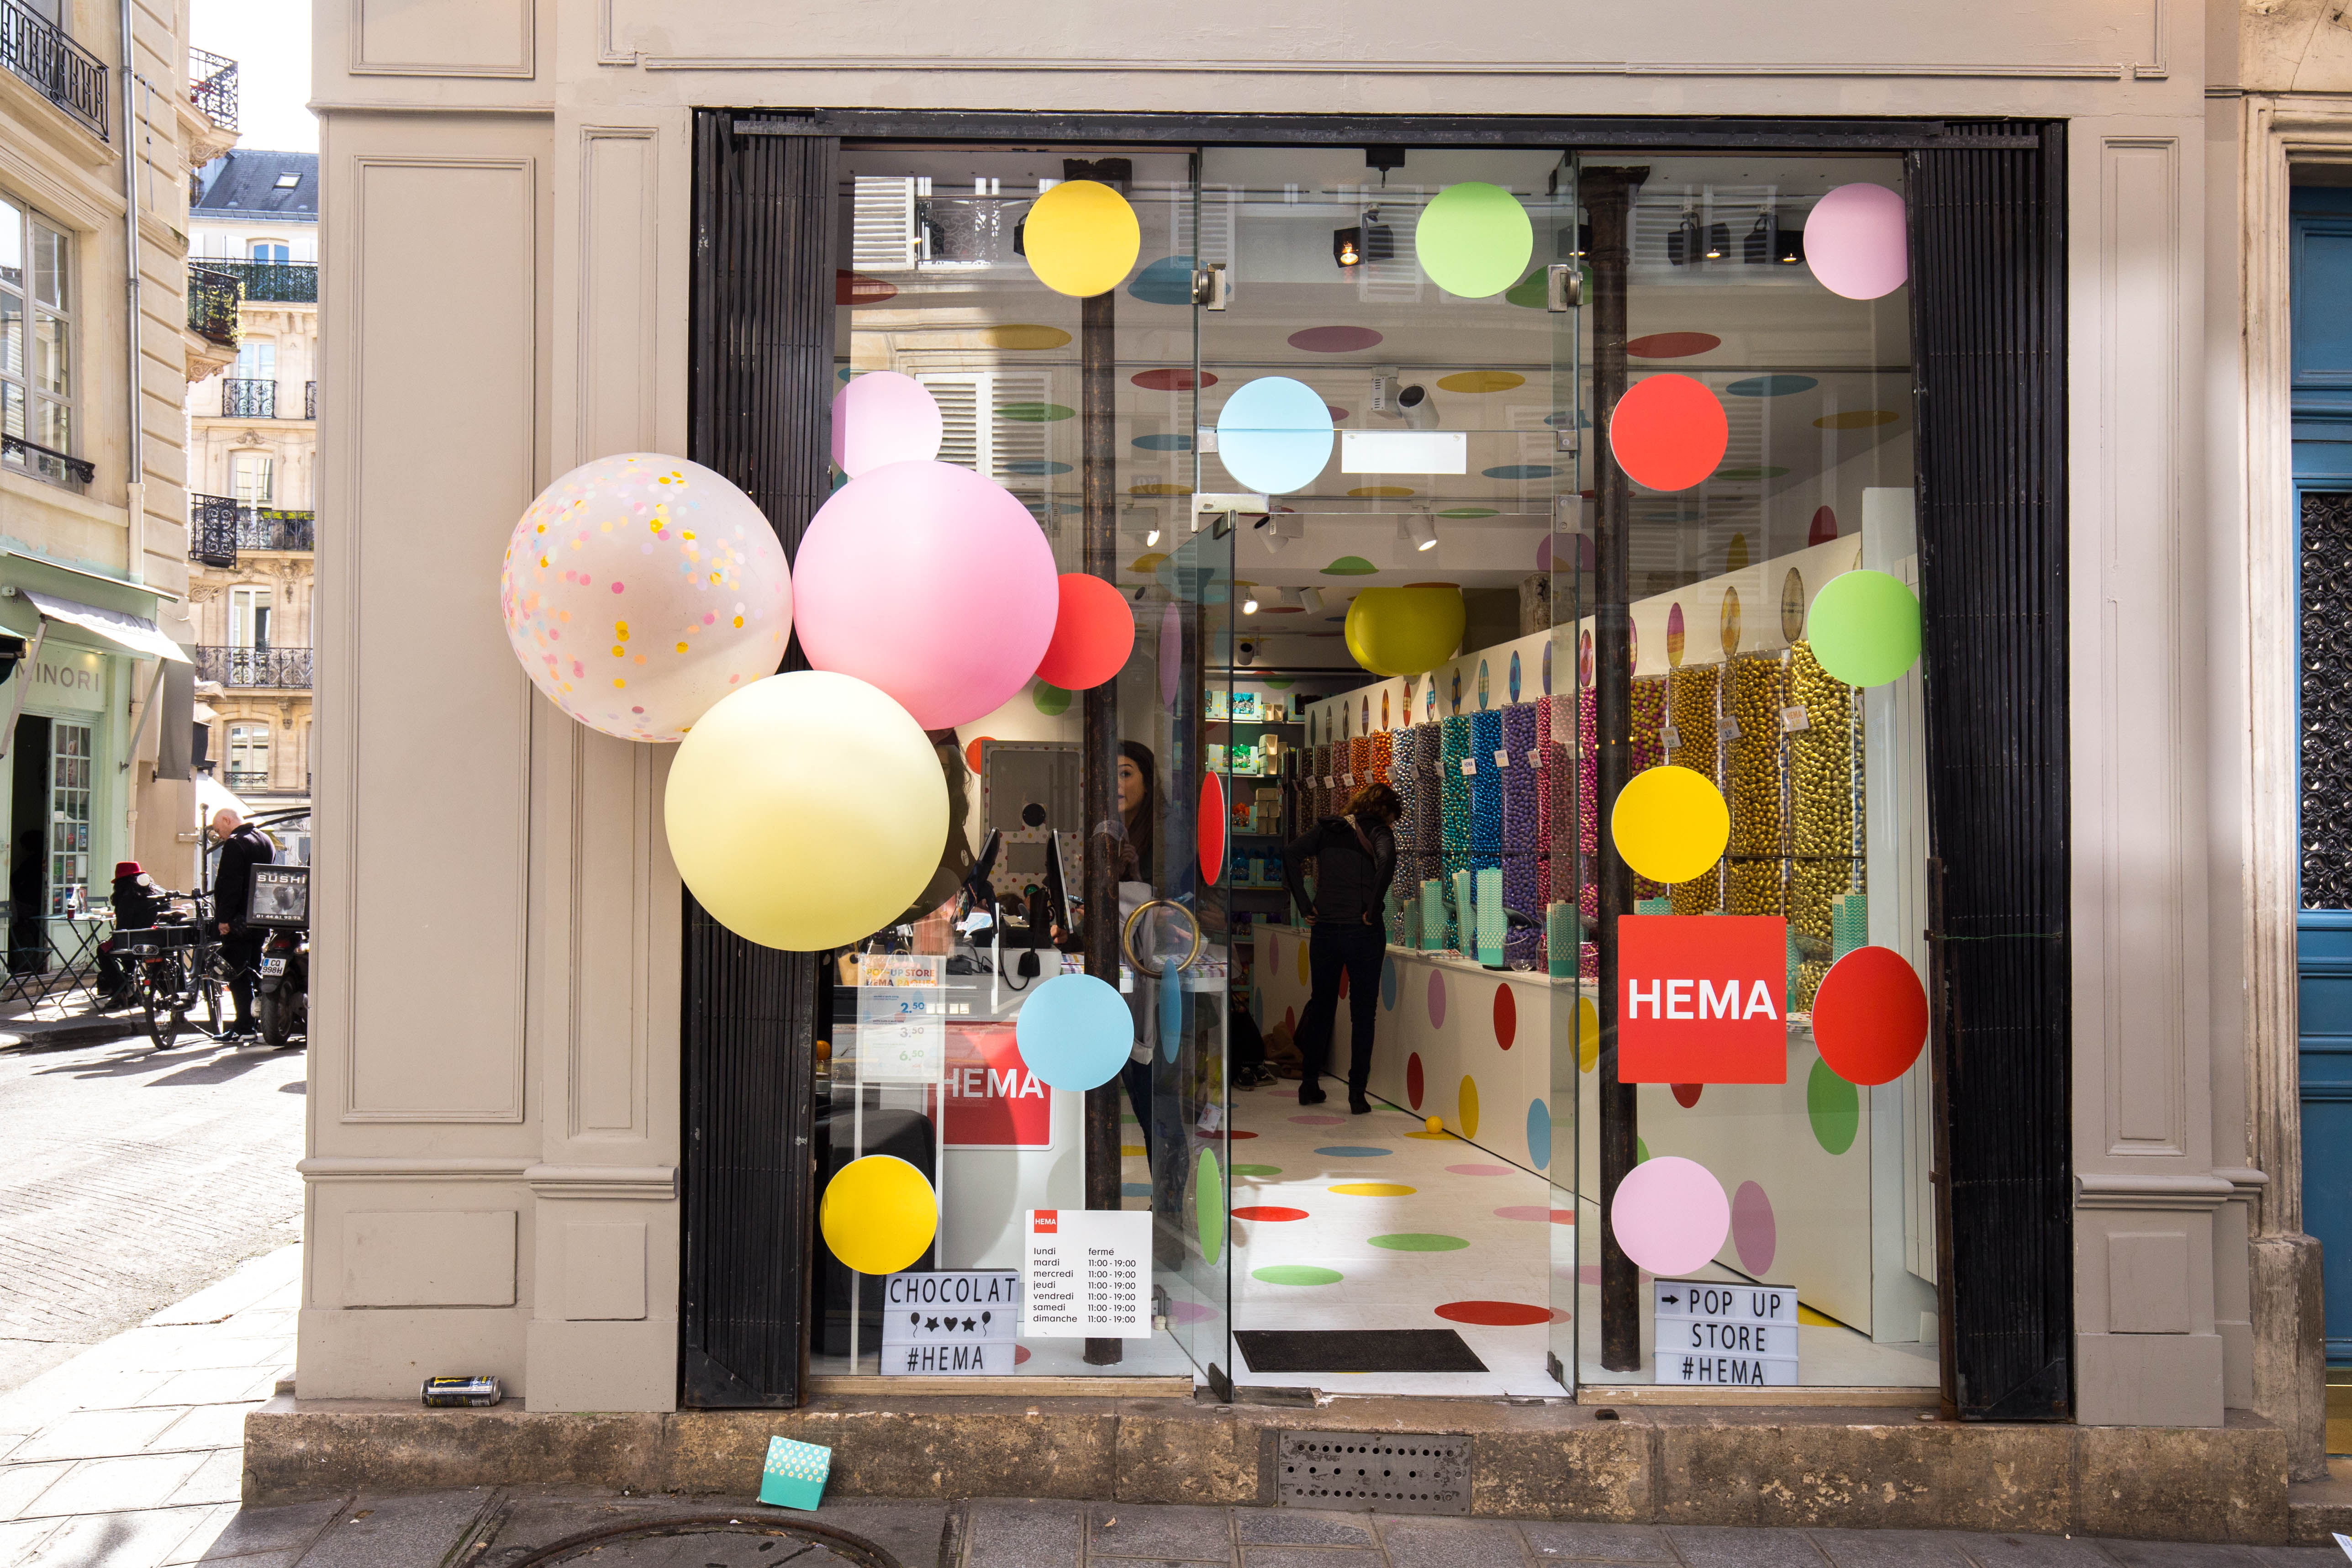 What is a pop-up shop?  Definition, history, benefits, costs